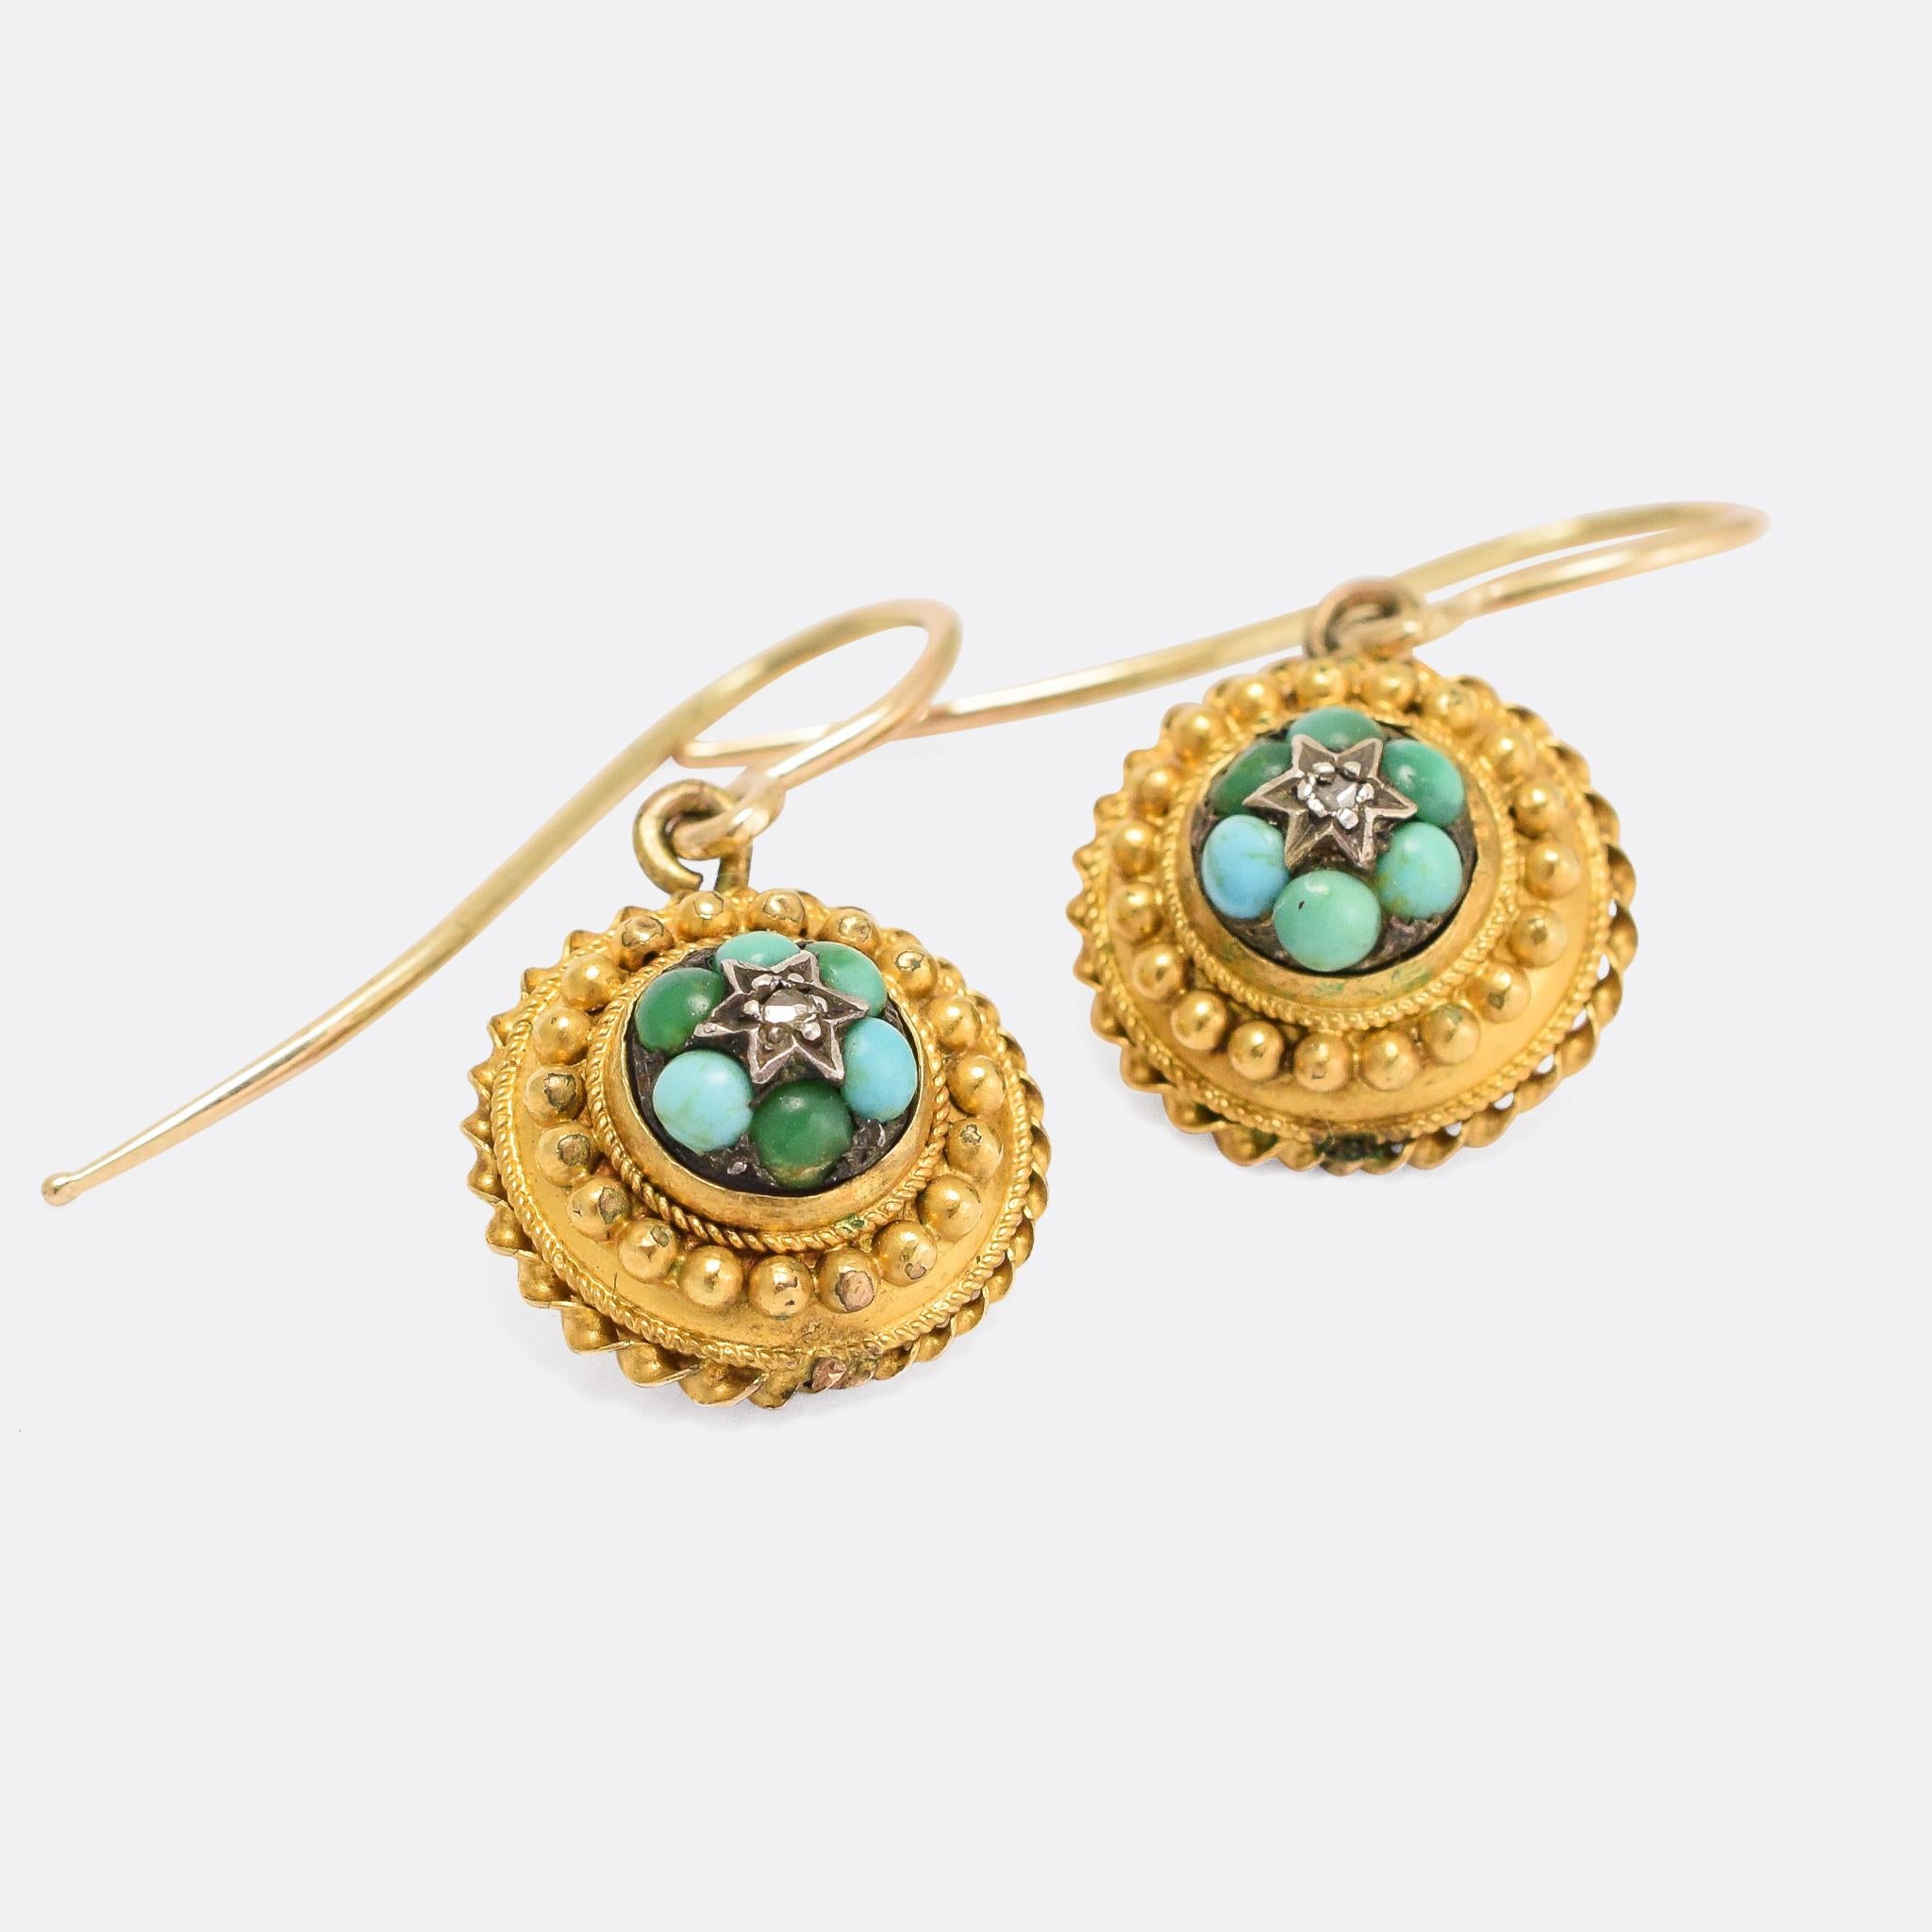 A fine example of antique Etruscan Revival jewellery, these earrings date from the 1870s - each one set with six turquoise cabochons and a central rose cut diamonds. They features excellent Etruscan goldwork: applied ropework and pomels, gold twist